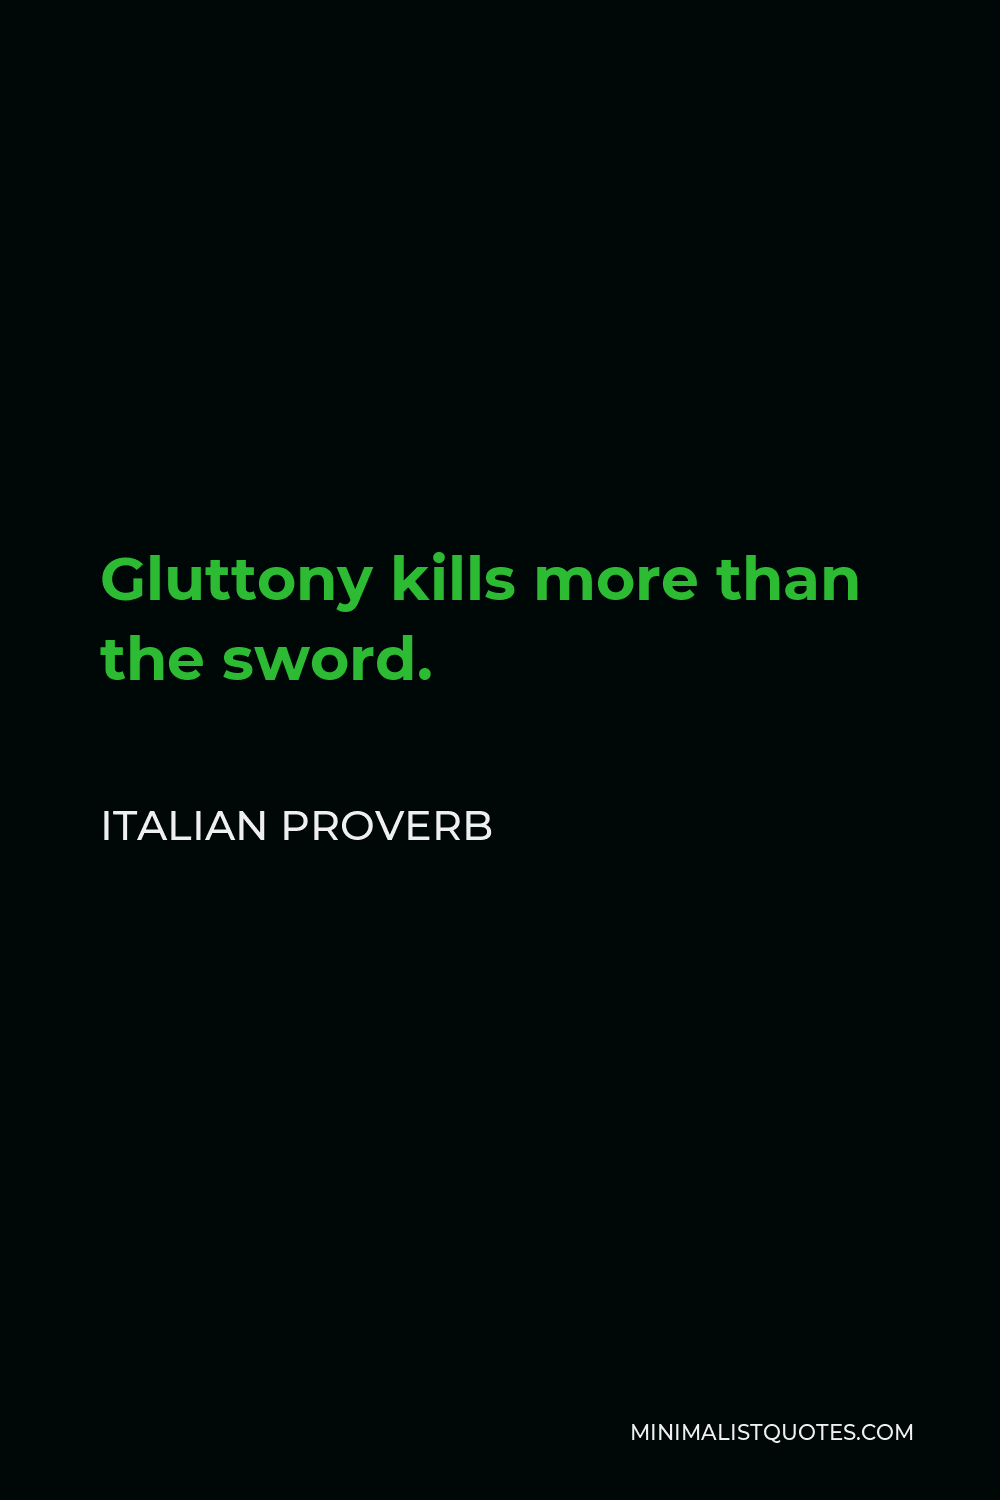 Italian Proverb Quote - Gluttony kills more than the sword.